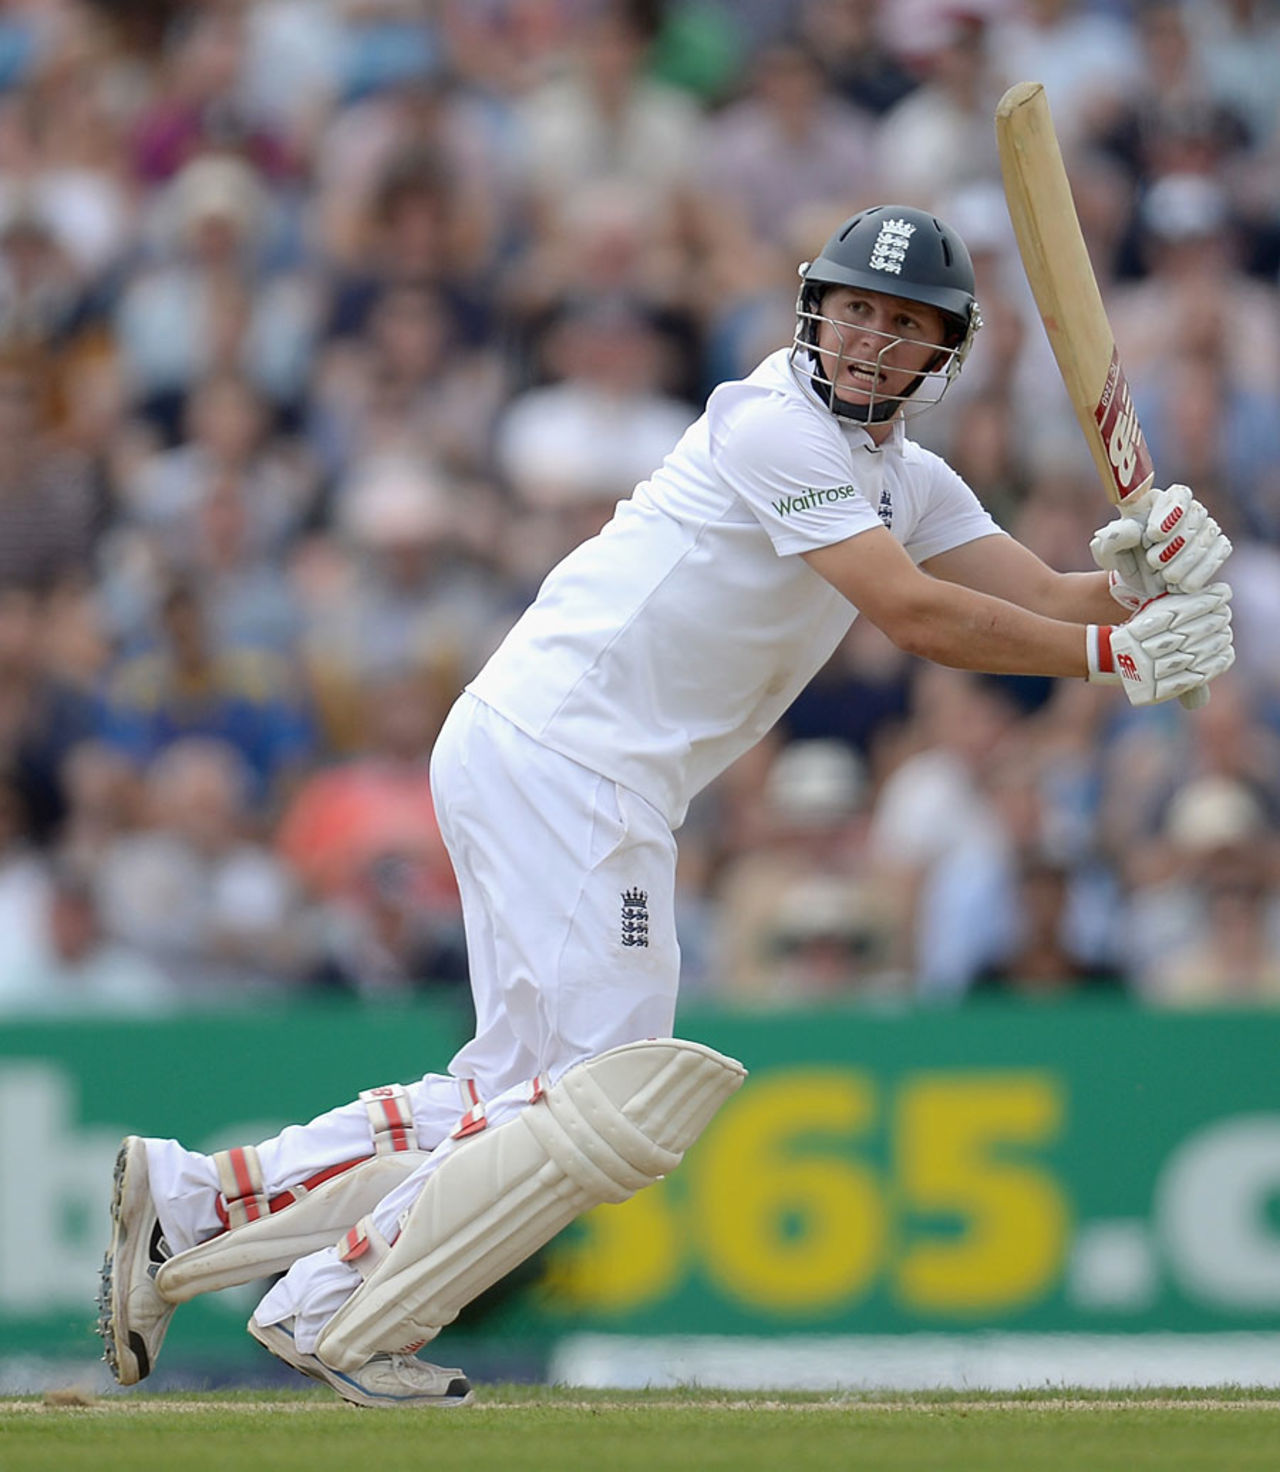 Gary Ballance continued his productive series, England v Sri Lanka, 2nd Investec Test, Headingley, 2nd day, June 21, 2014